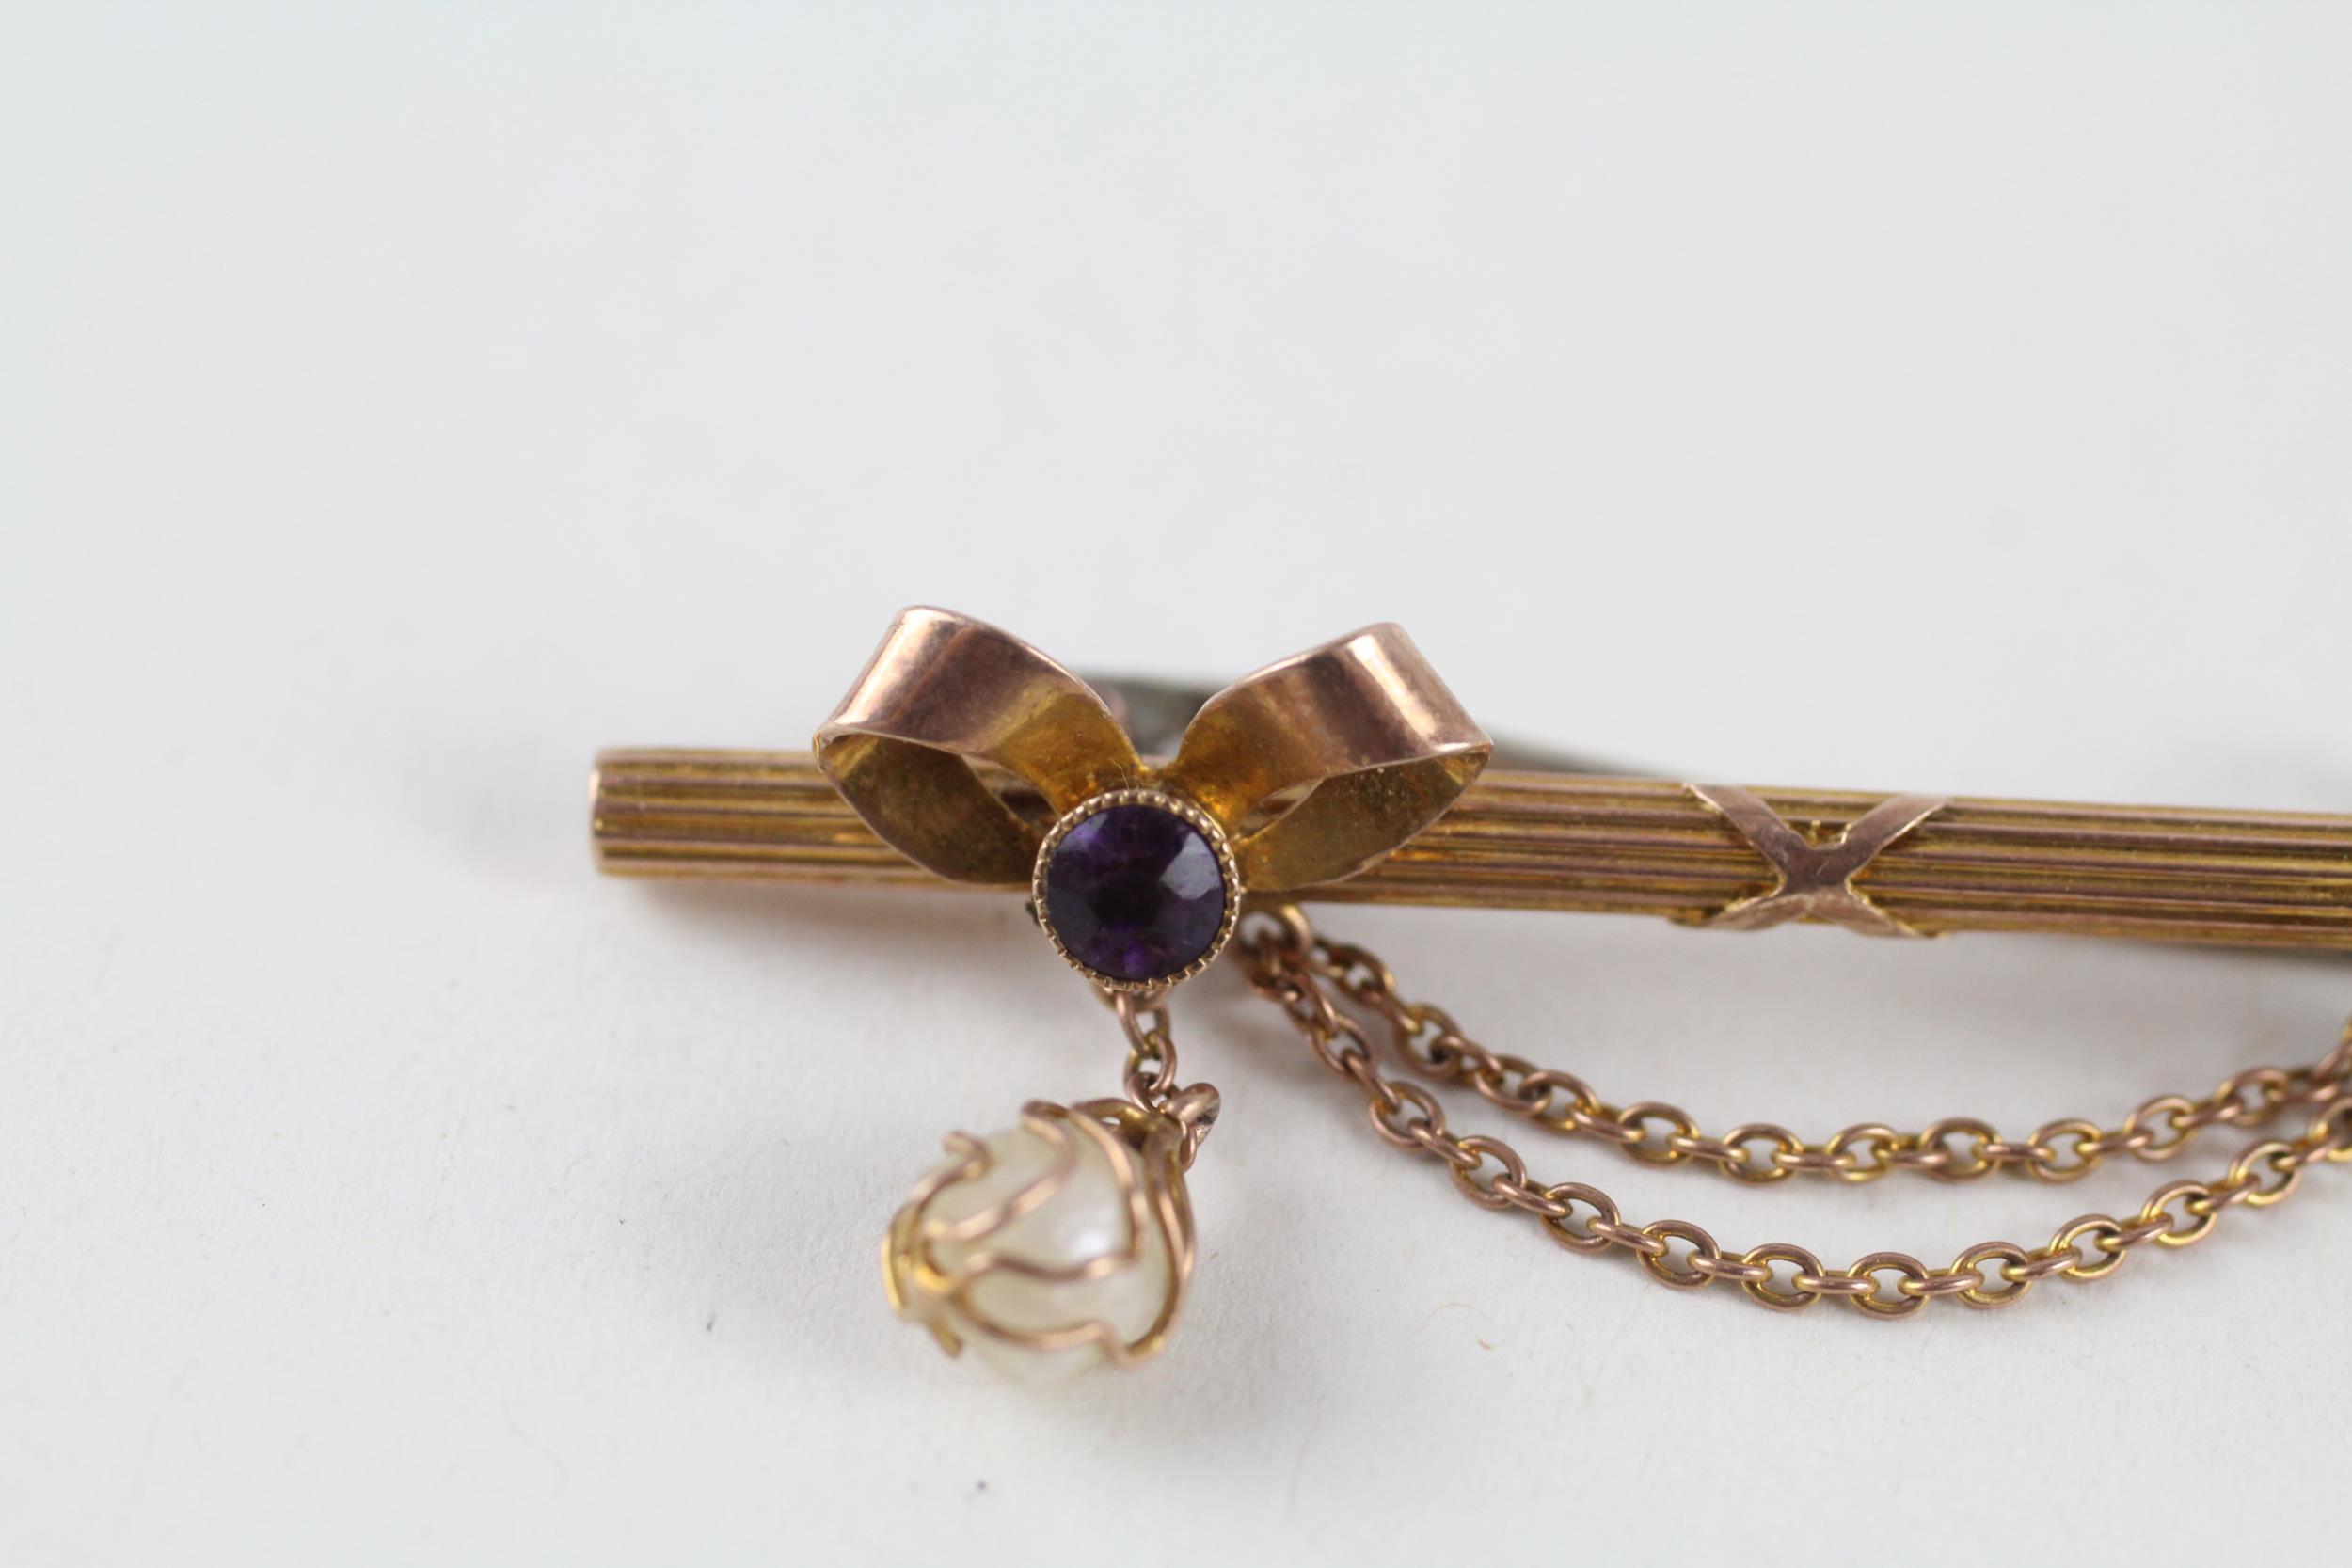 9ct gold antique amethyst & pearl bow brooch with base metal pin (2.1g) - Image 3 of 4